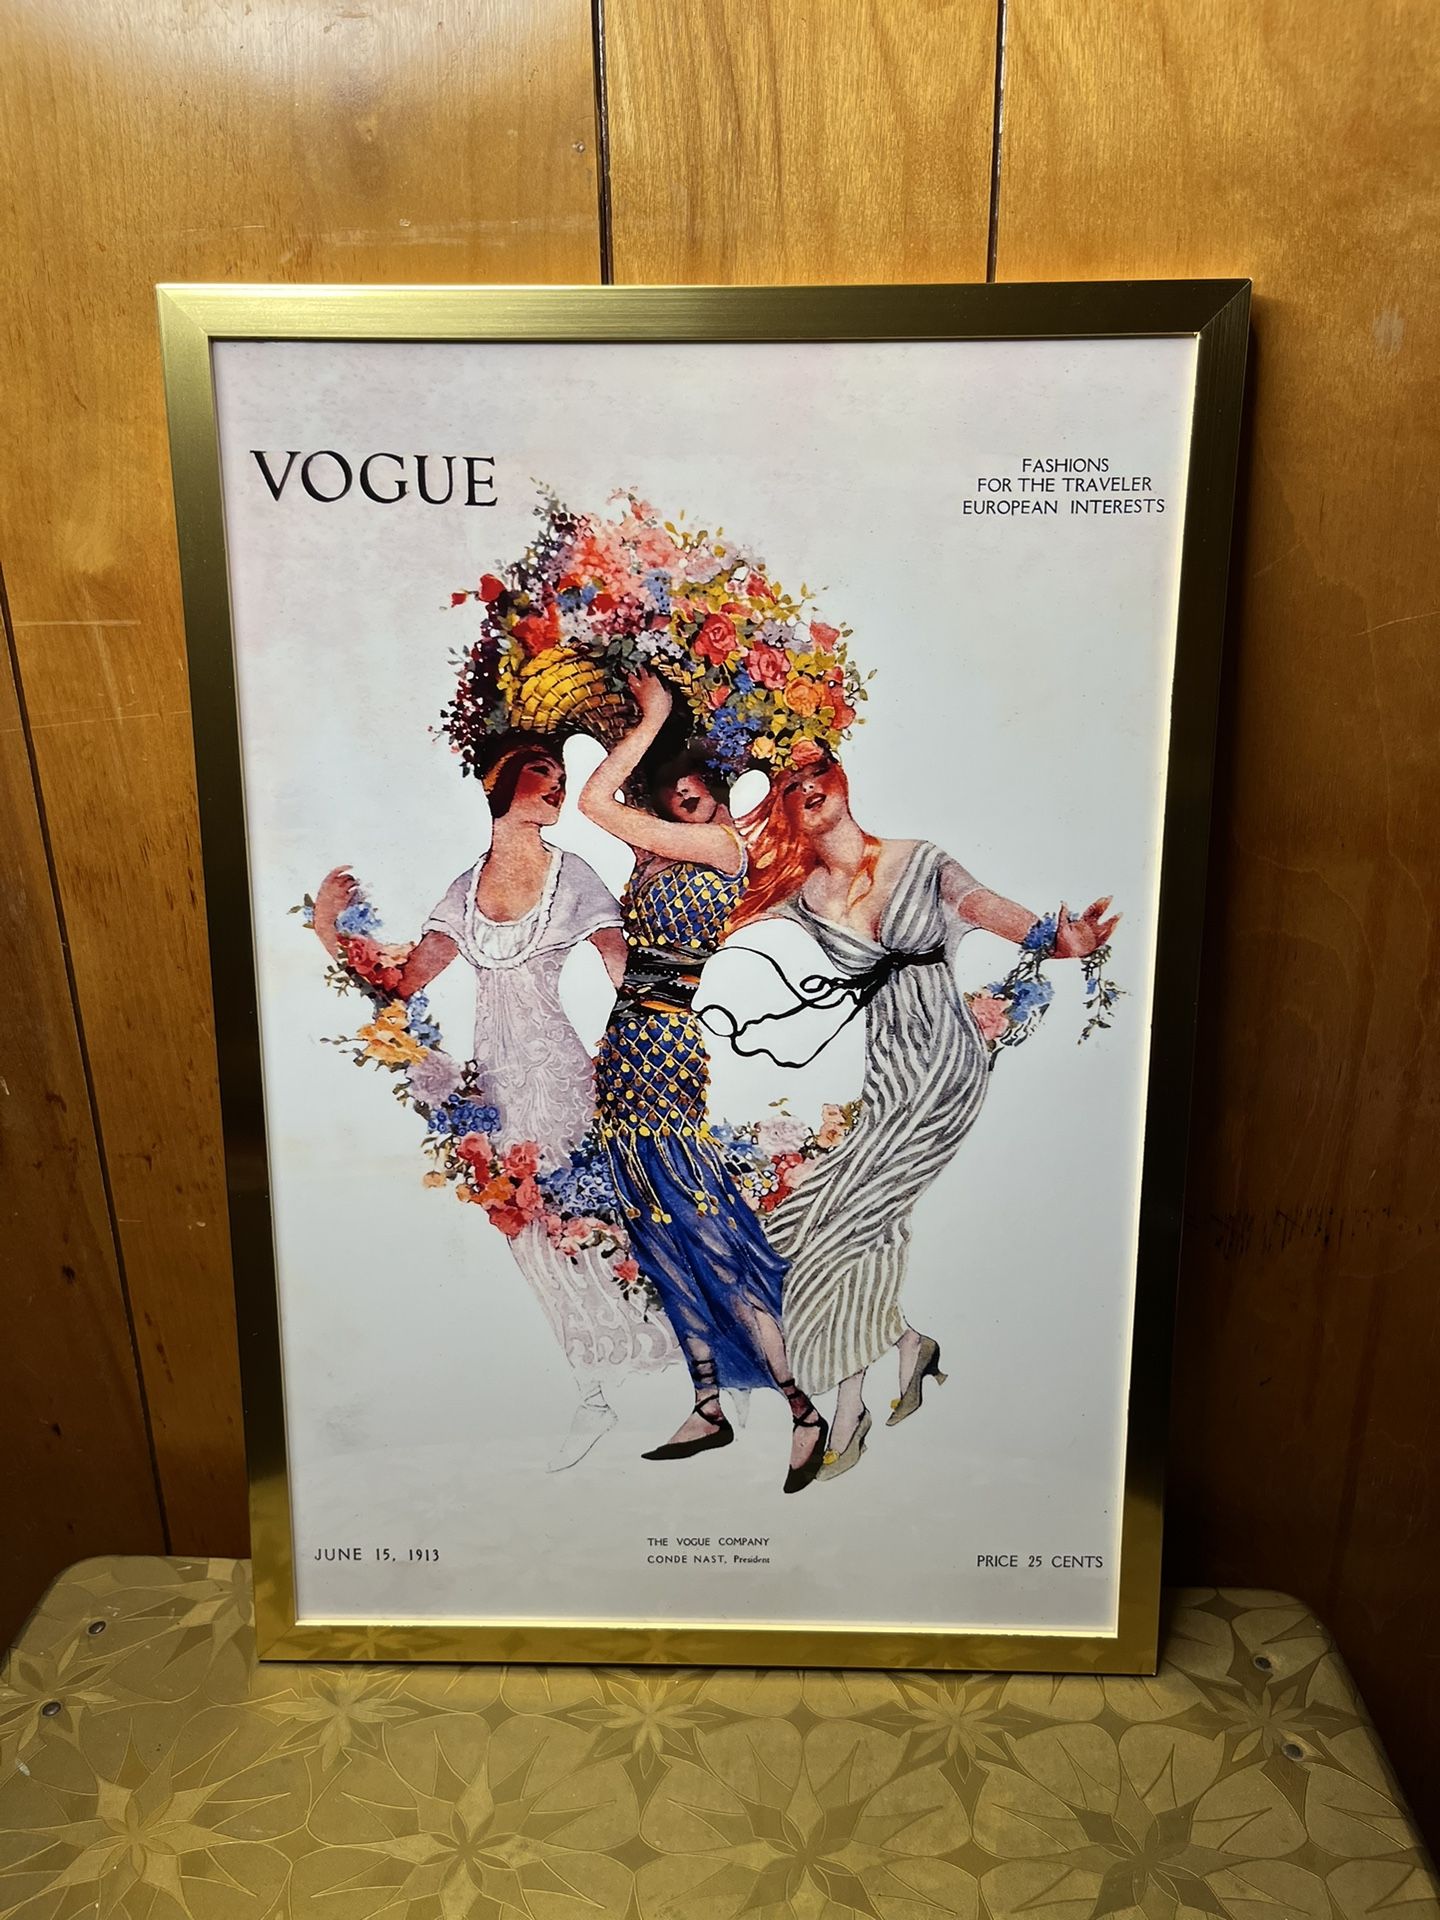 Vintage Vogue Magazine Cover Reproduction 14x20 Print In Frame